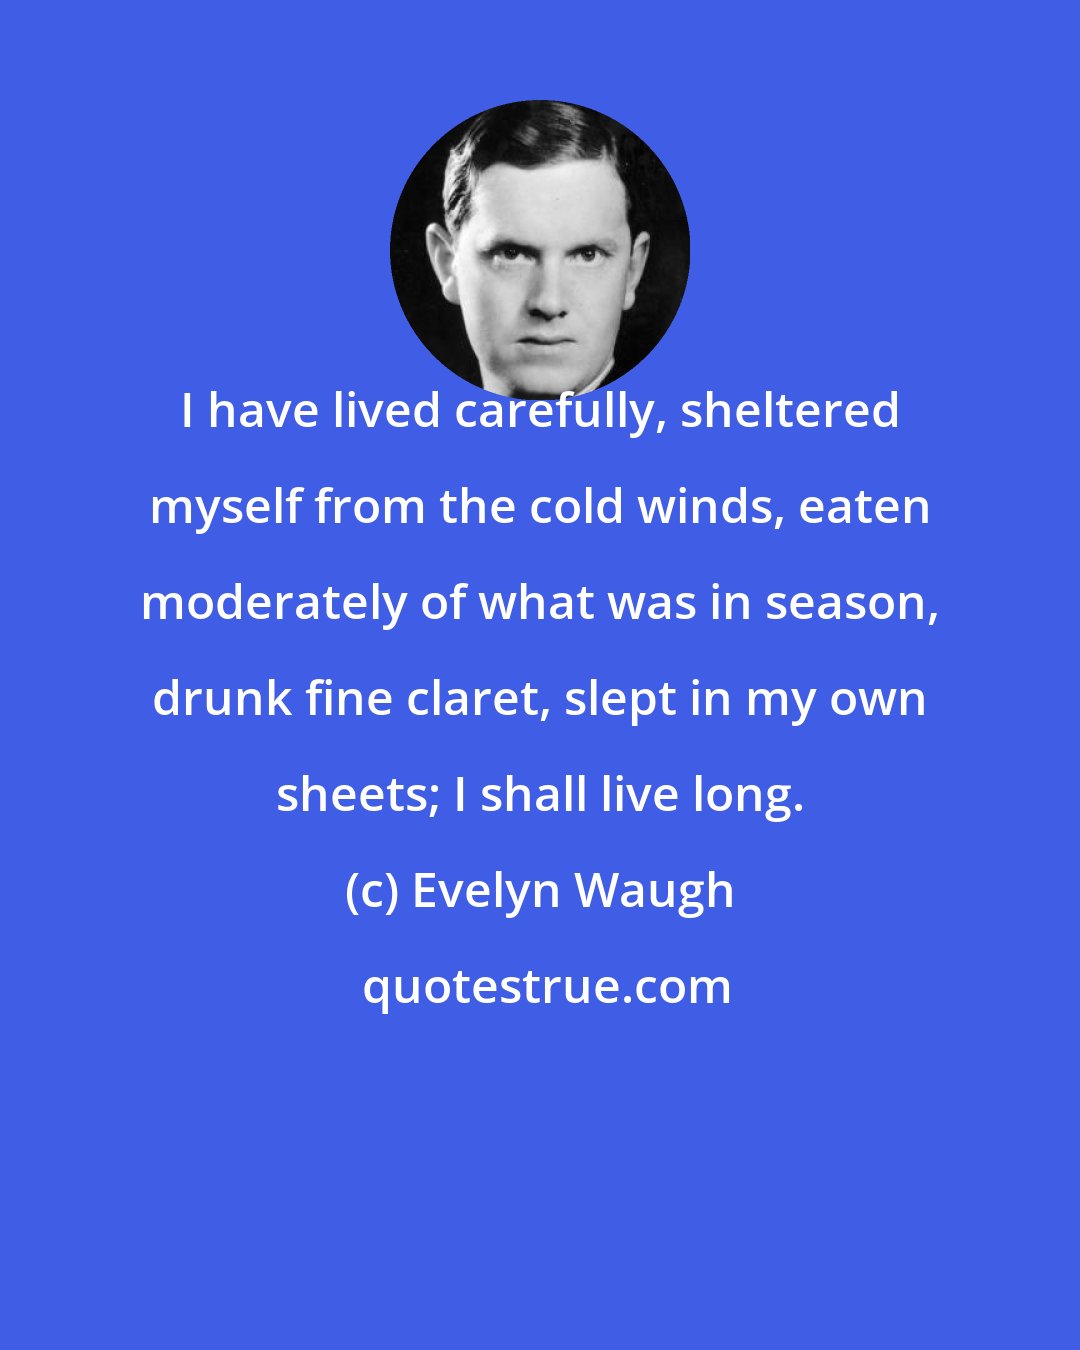 Evelyn Waugh: I have lived carefully, sheltered myself from the cold winds, eaten moderately of what was in season, drunk fine claret, slept in my own sheets; I shall live long.